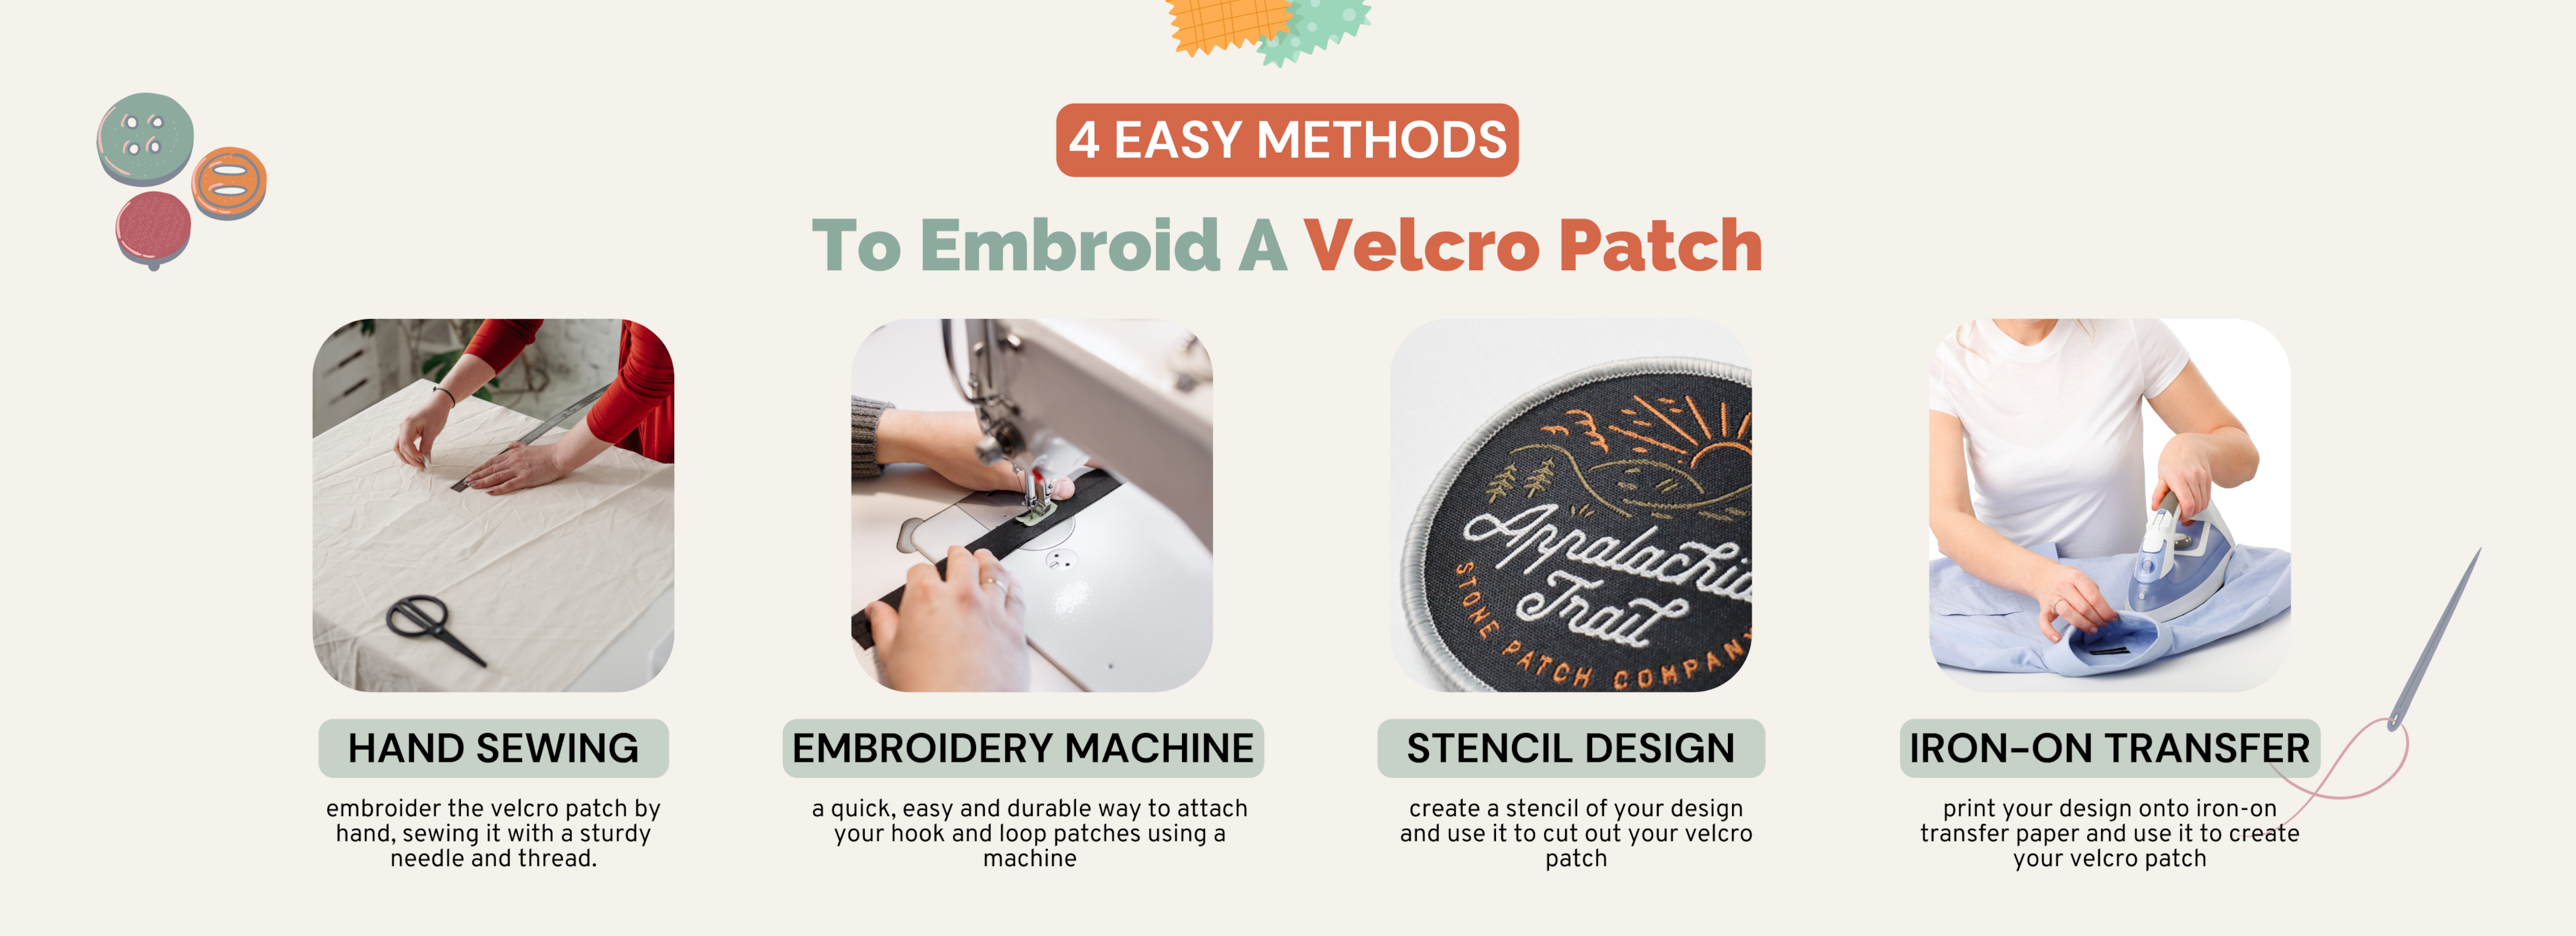 Durable, Versatile, & Functional! The Uses & Benefits Of Velcro Patches